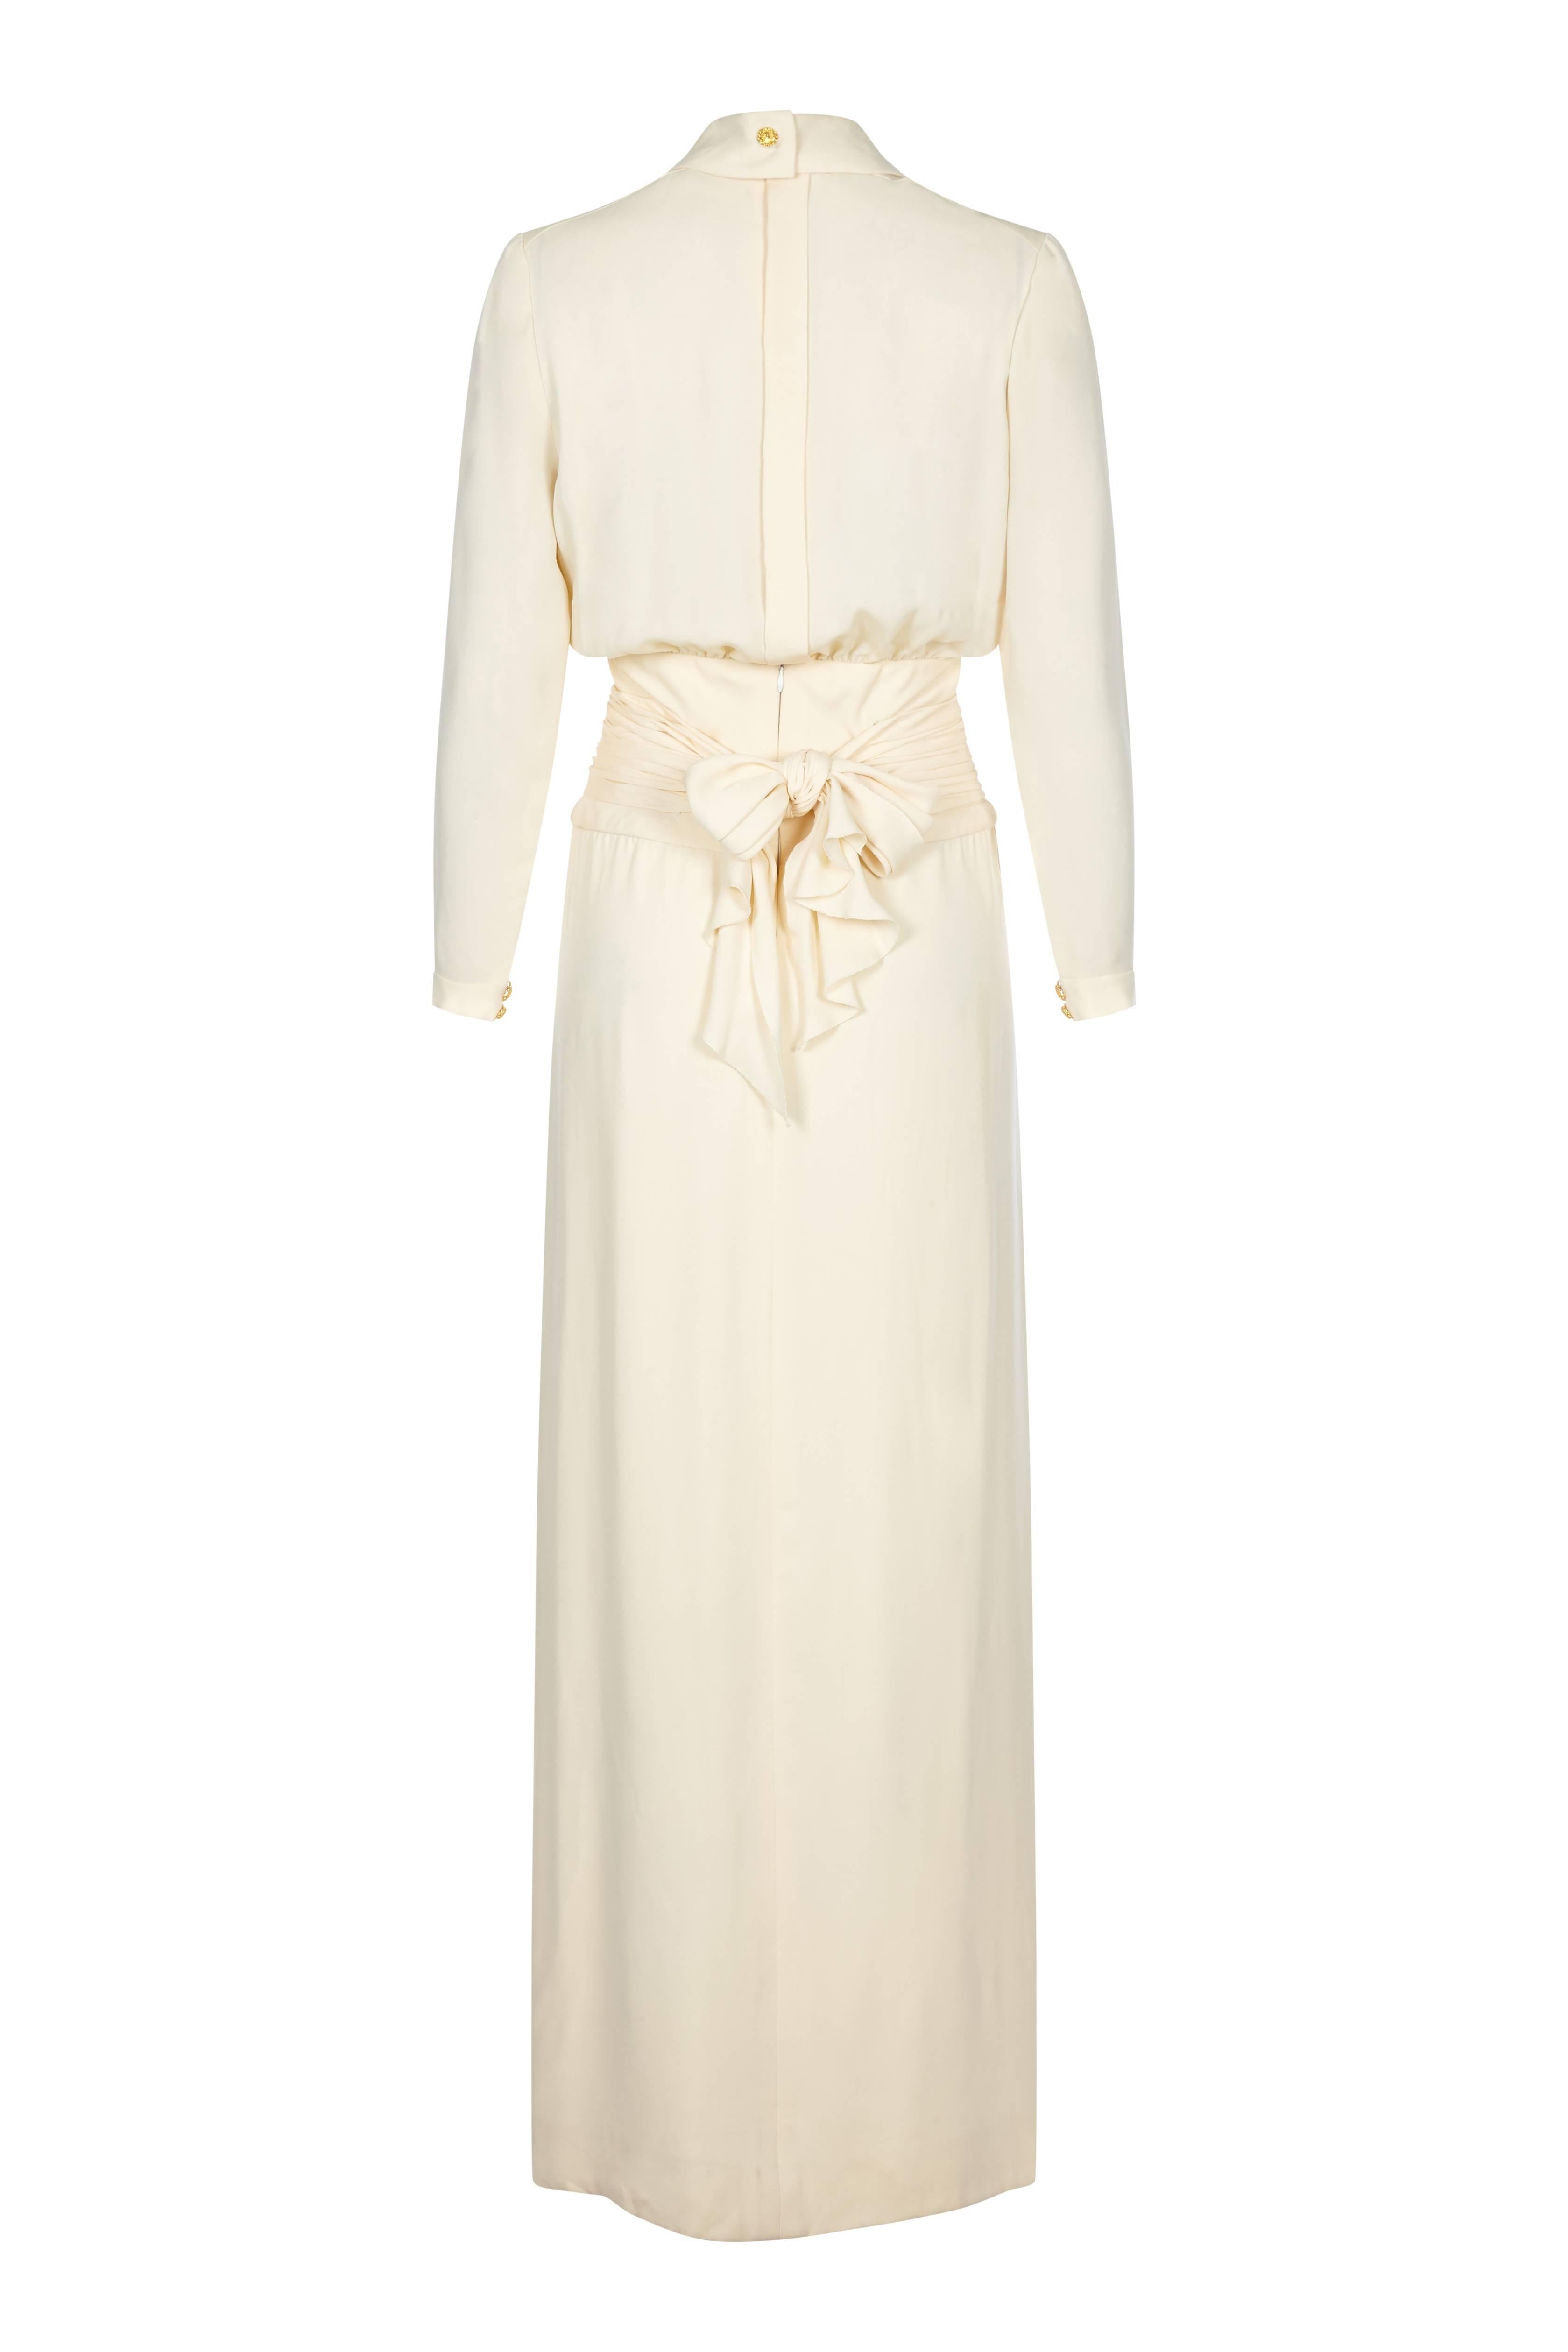 This very special Chanel 1980s silk pleated dress exudes simple elegance alongside a wealth of fine details. The dress is 100% pure silk crepe in soft cream; whilst the long skirt and front of the bodice are fully lined, the sleeves and back of the